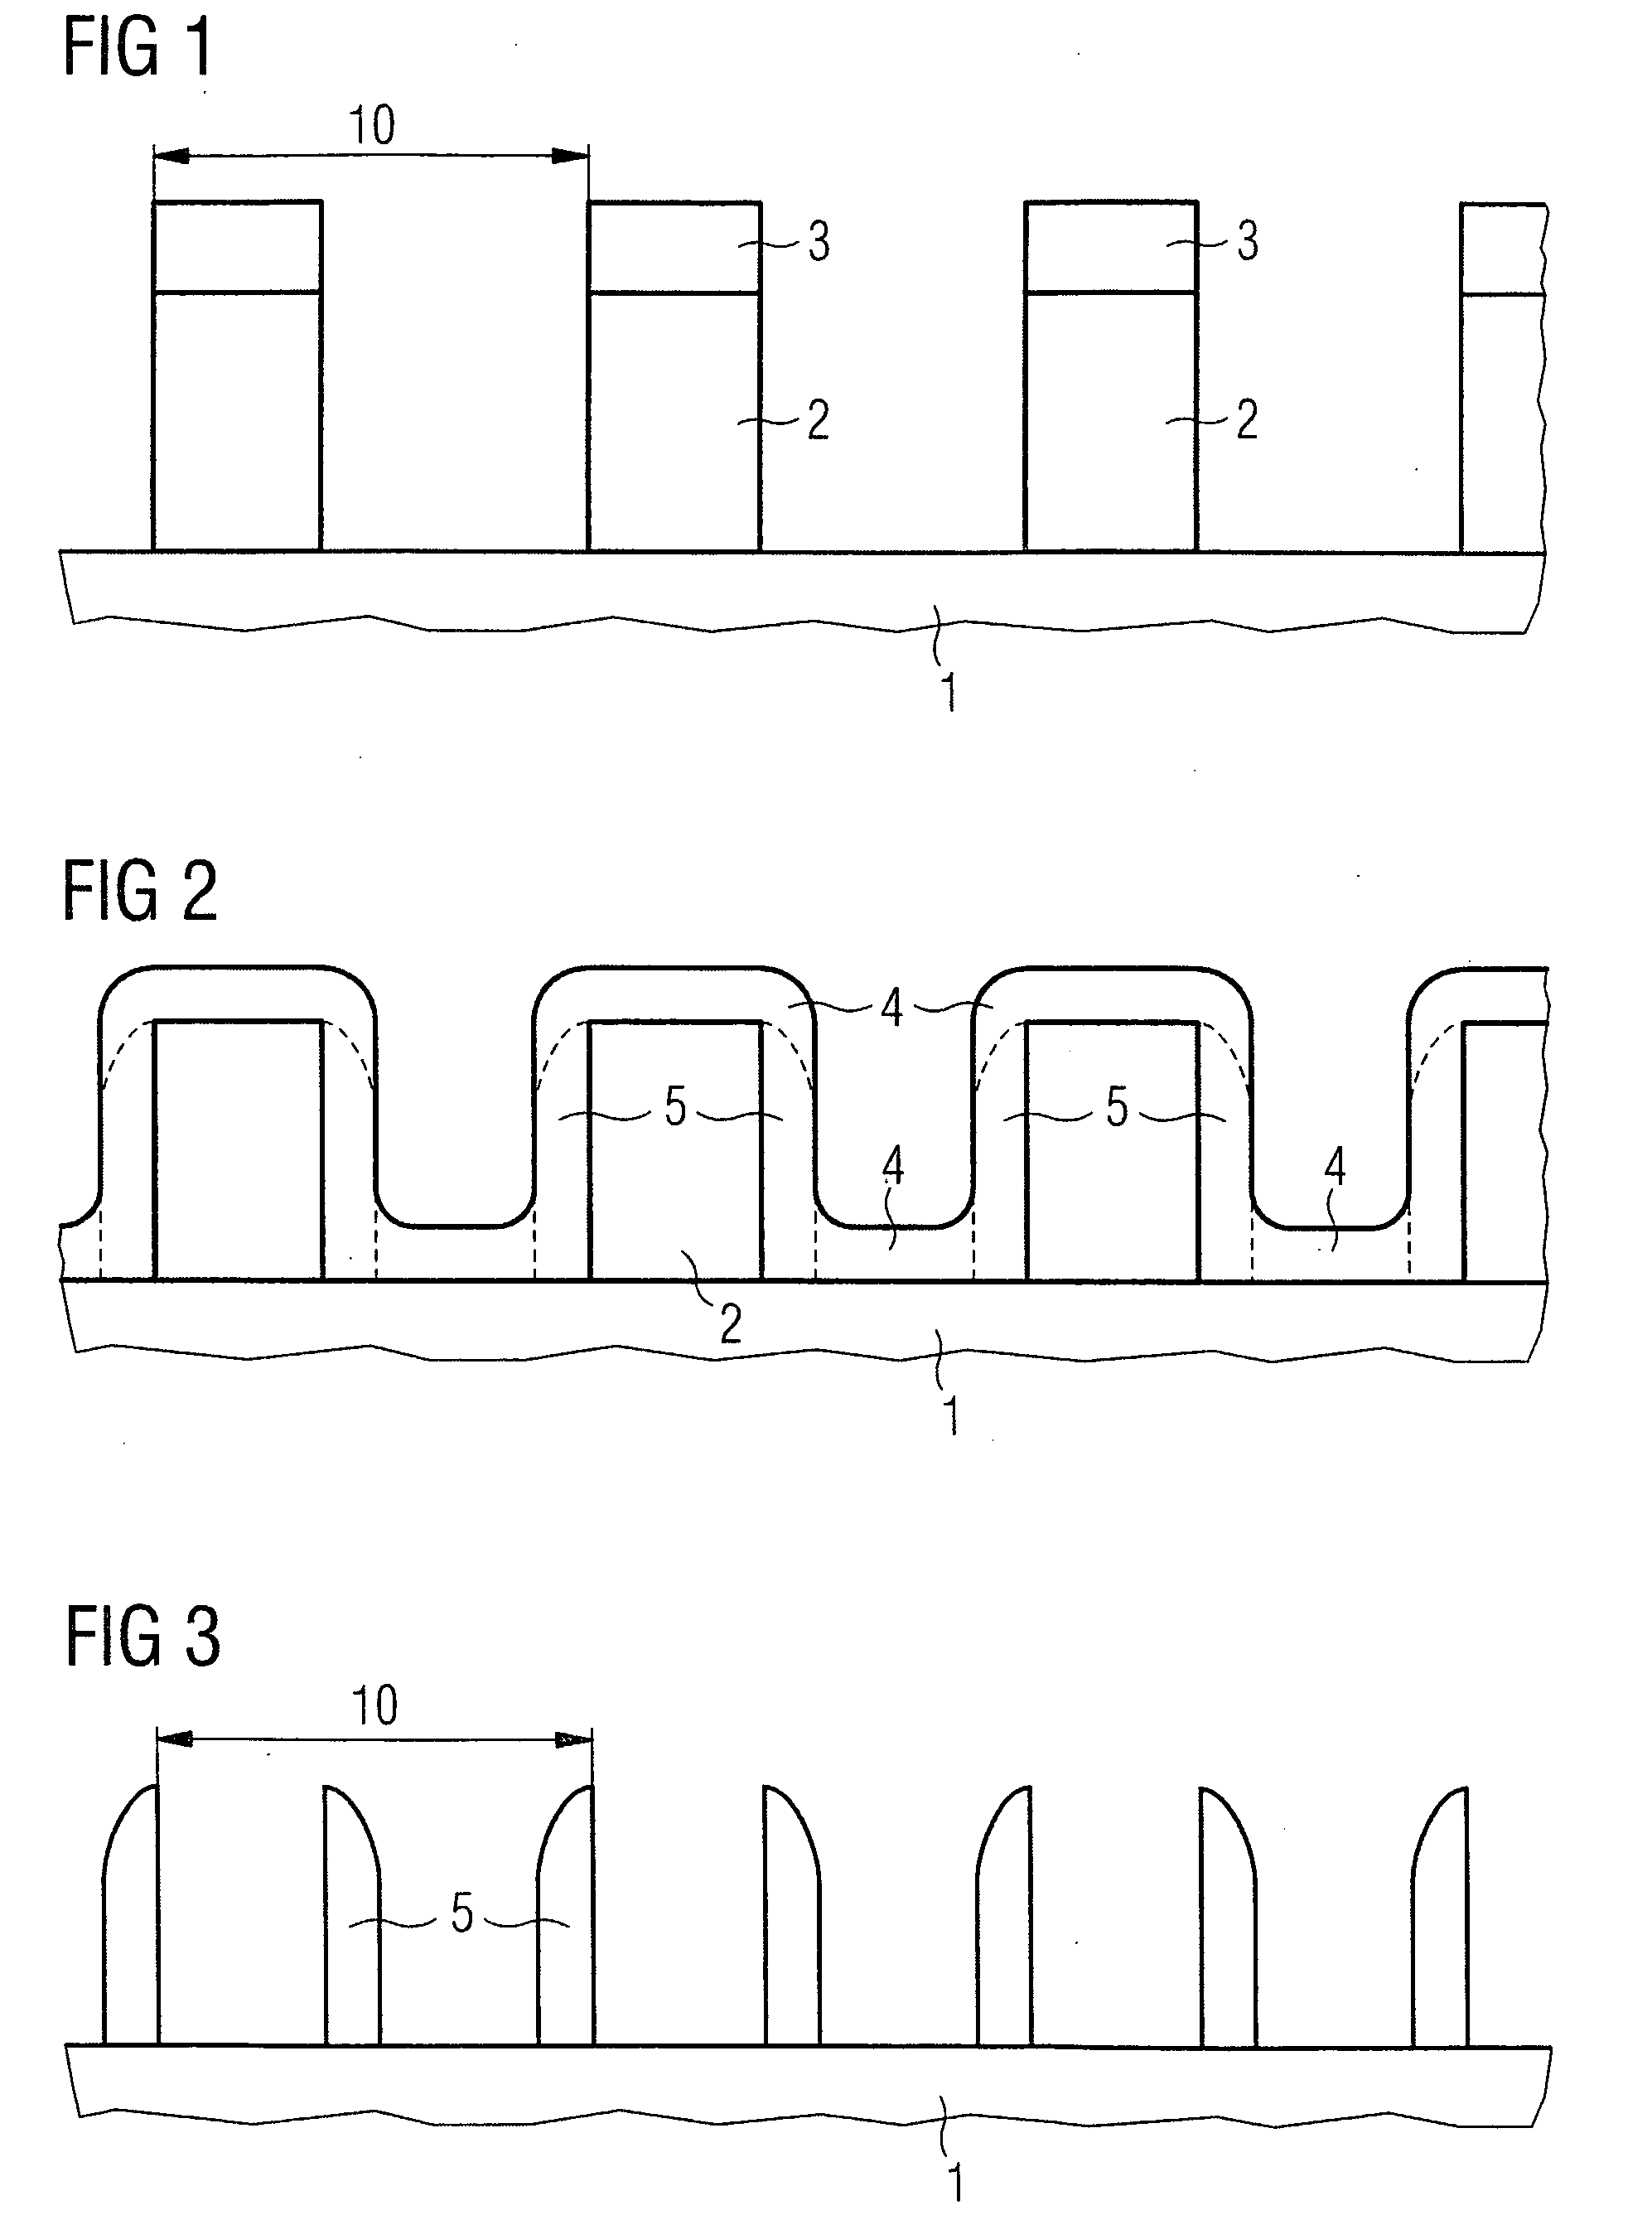 Method of producing pitch fractionizations in semiconductor technology